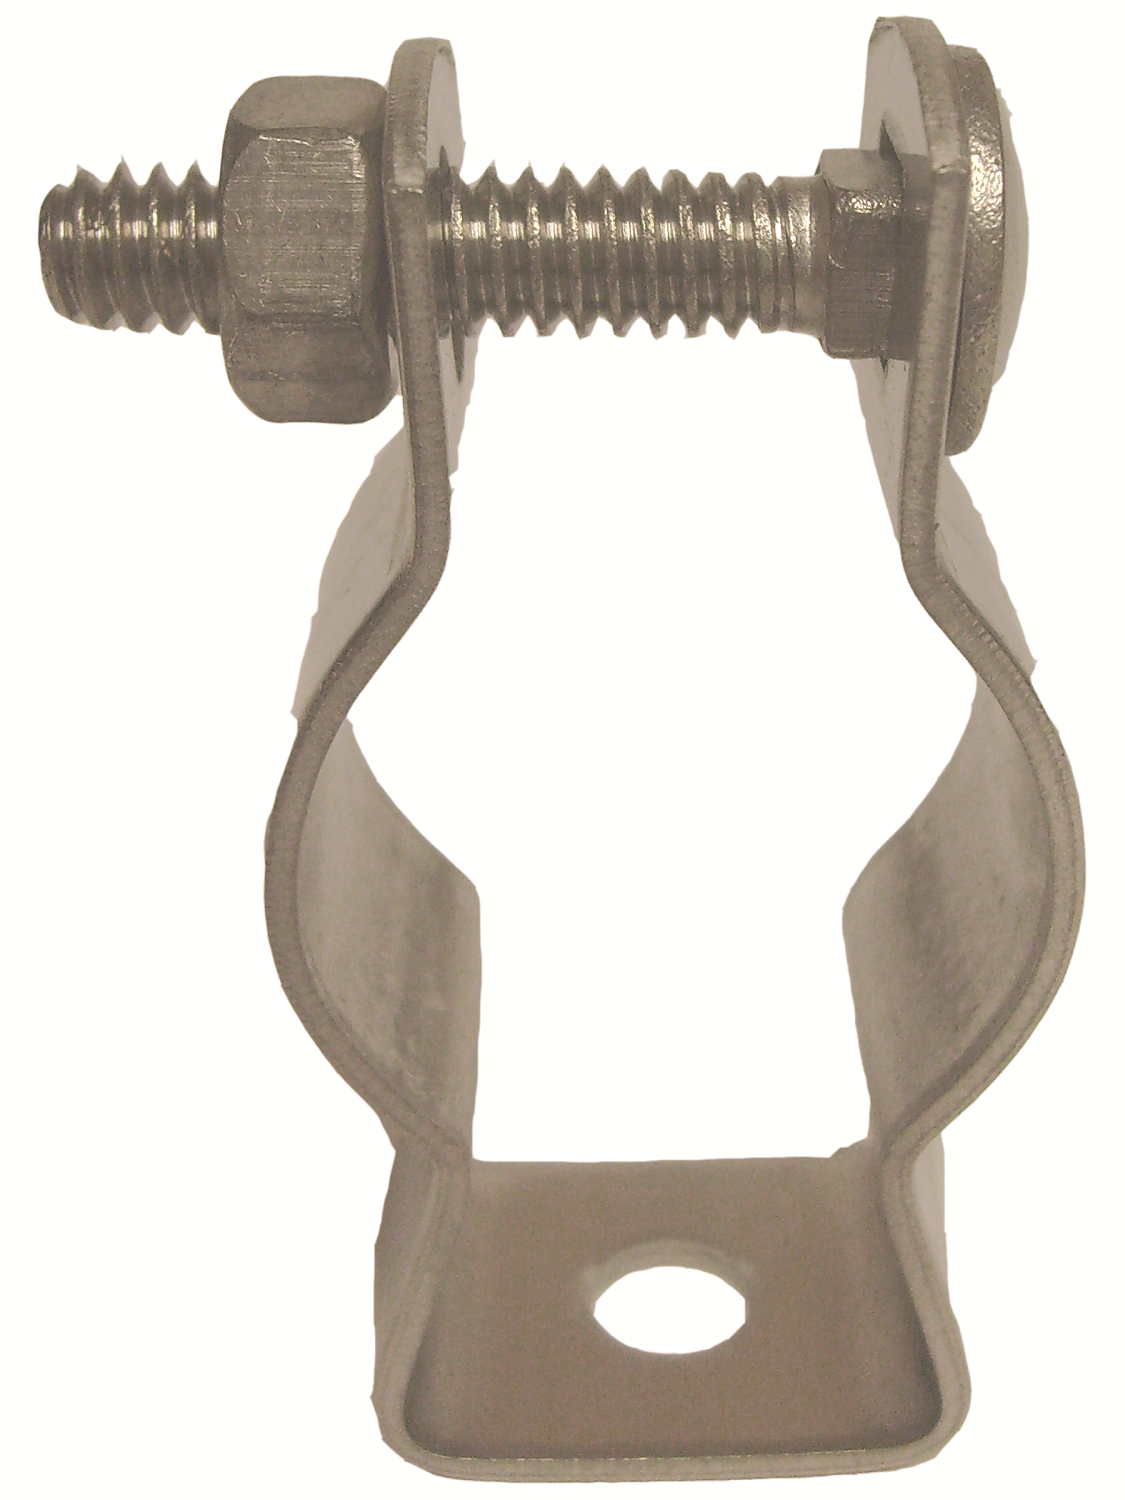 Allied Tube & Conduit HCS0KON Conduit Hanger With Nut and Bolt, 1/2 in Conduit, 50 lb Load, Carbon Steel